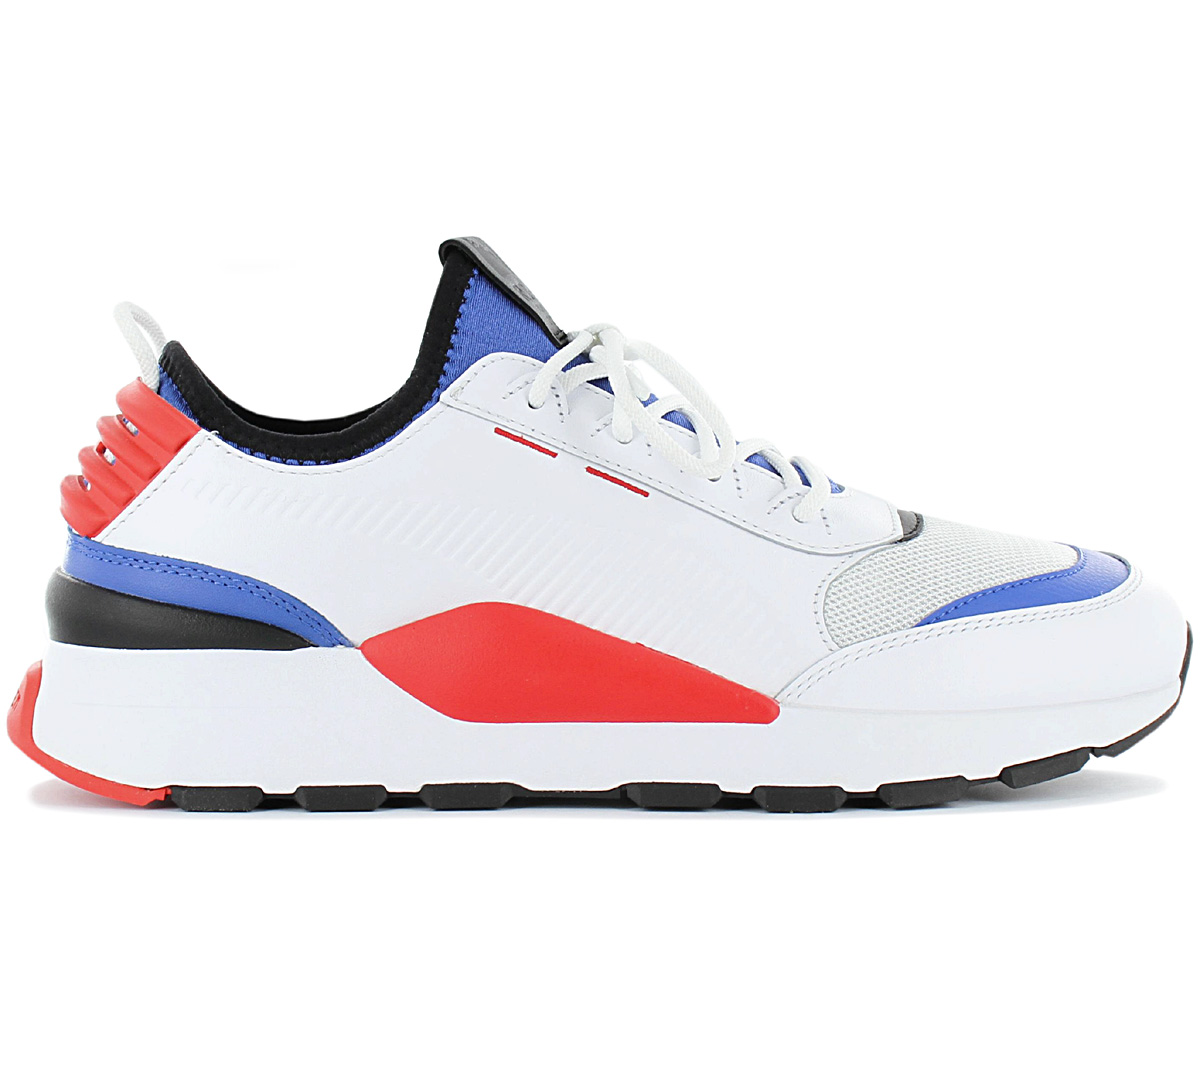 NEW Puma RS-0 SOUND 366890-01 Men´s Shoes Trainers Sneakers SALE | eBay